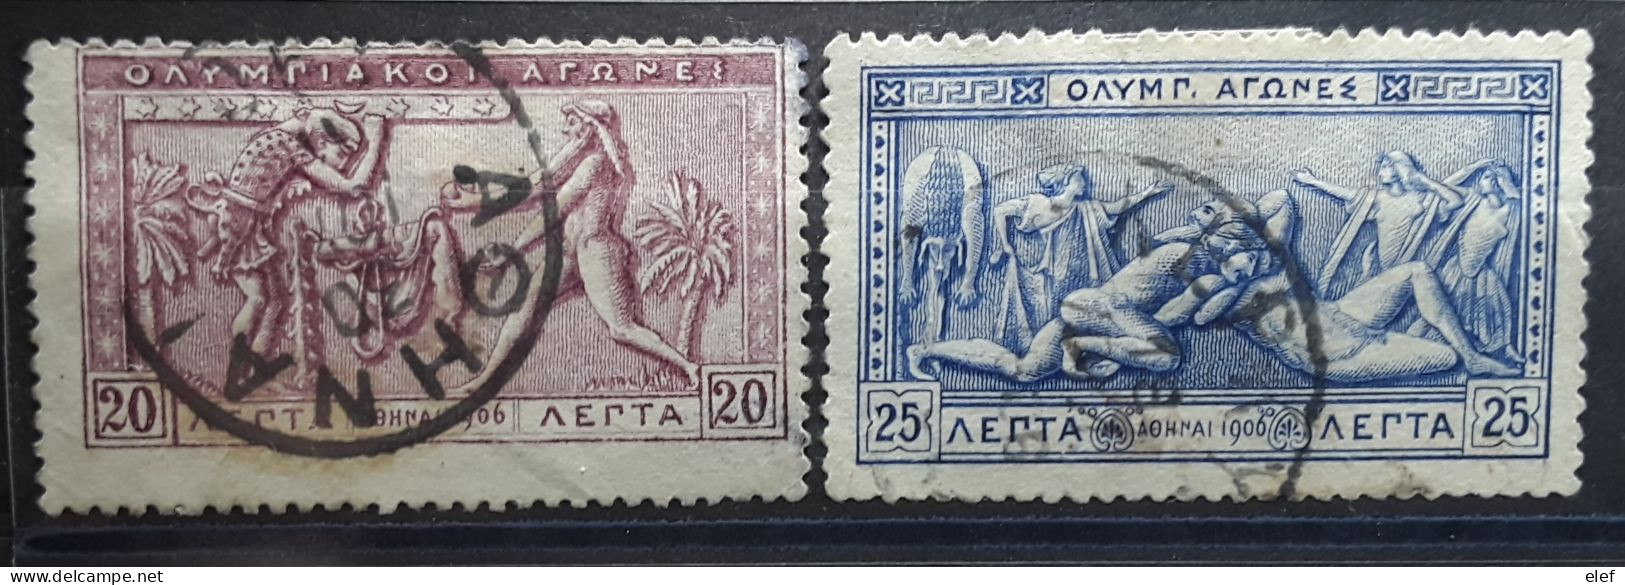 GRECE GREECE 1906, Jeux Olympiques OLYMPICS ATHENS 2 Timbres , Yvert 170  + 171 ,  Obl  TB - Gebruikt